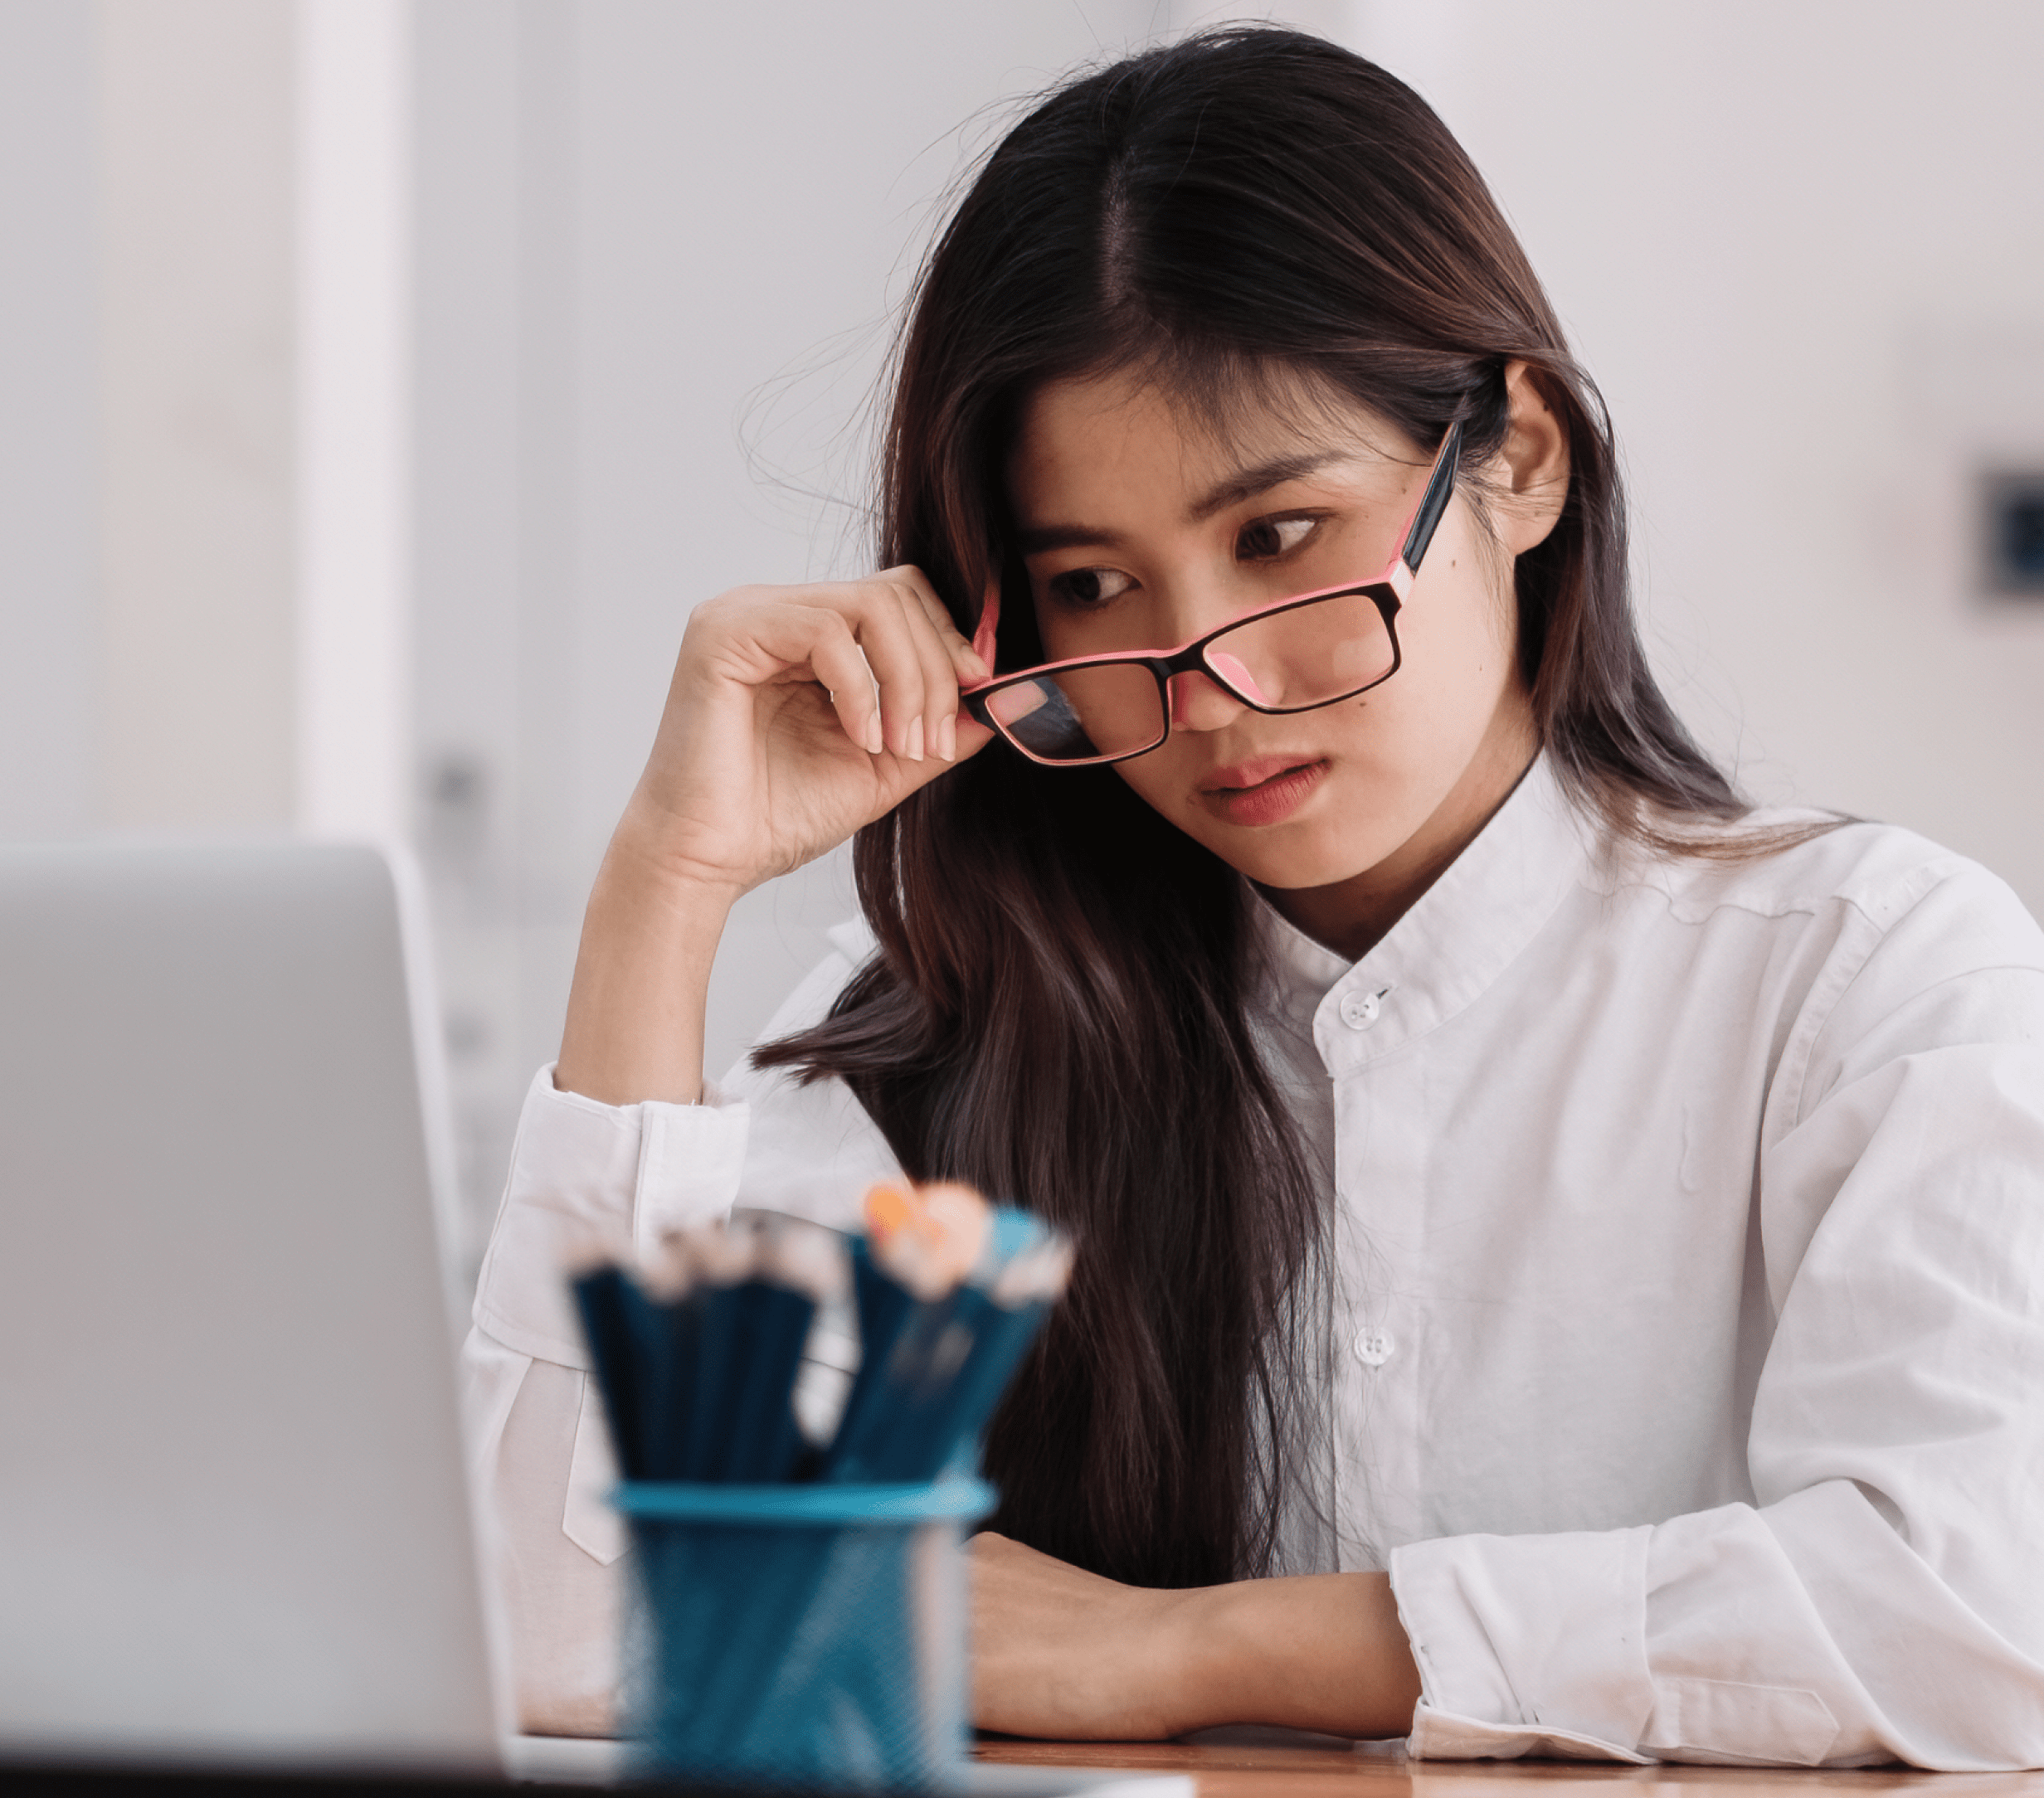 Woman removing glasses to look at laptop